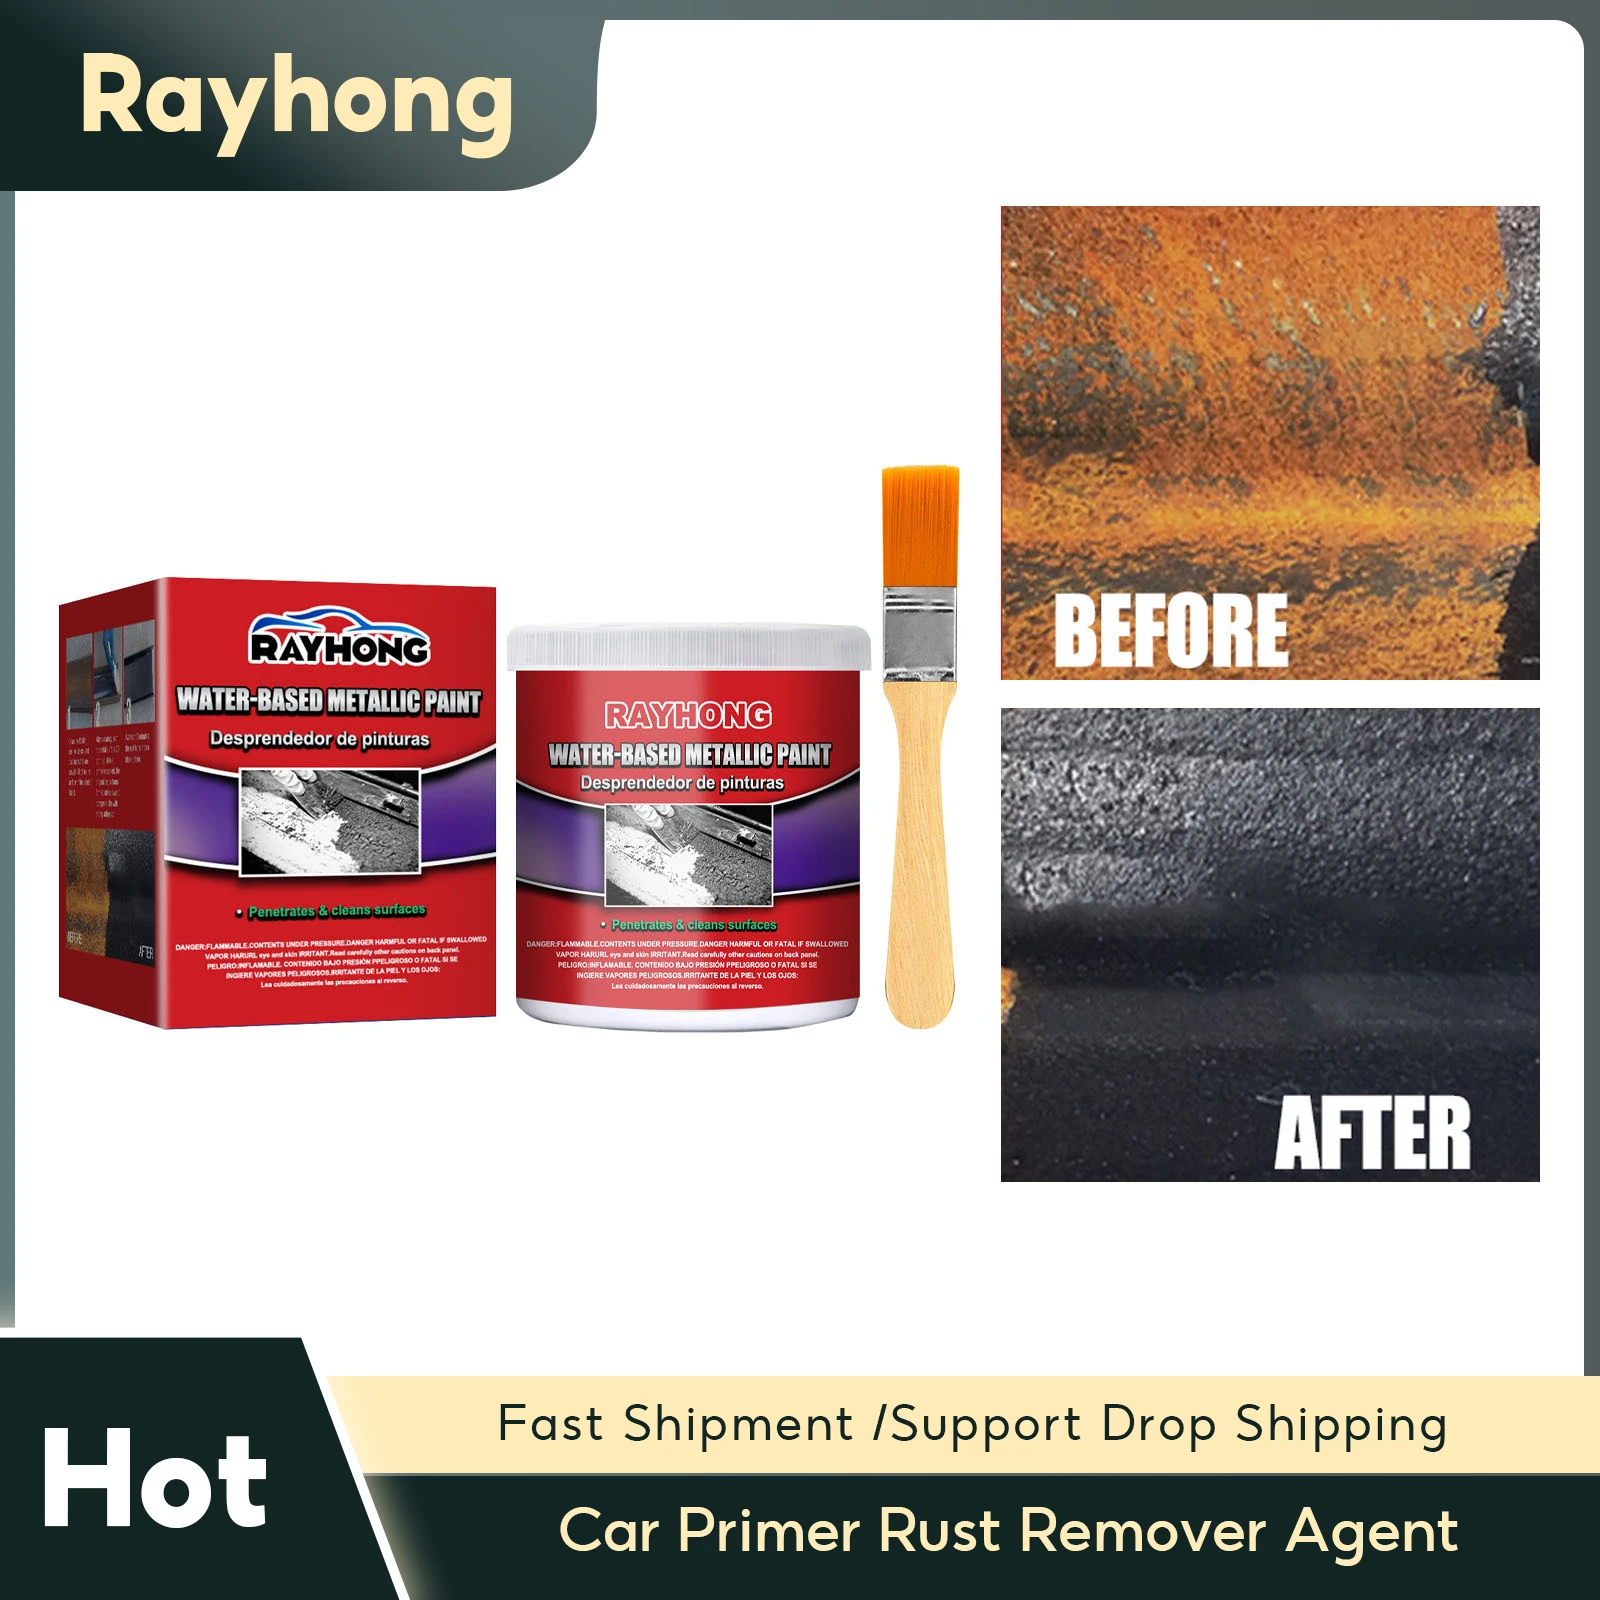 

Car Primer Rust Remover Agent Water-Based Metallic Paint Protect Cars Coating Metal Renovation Automobile Rust Conversion Agent